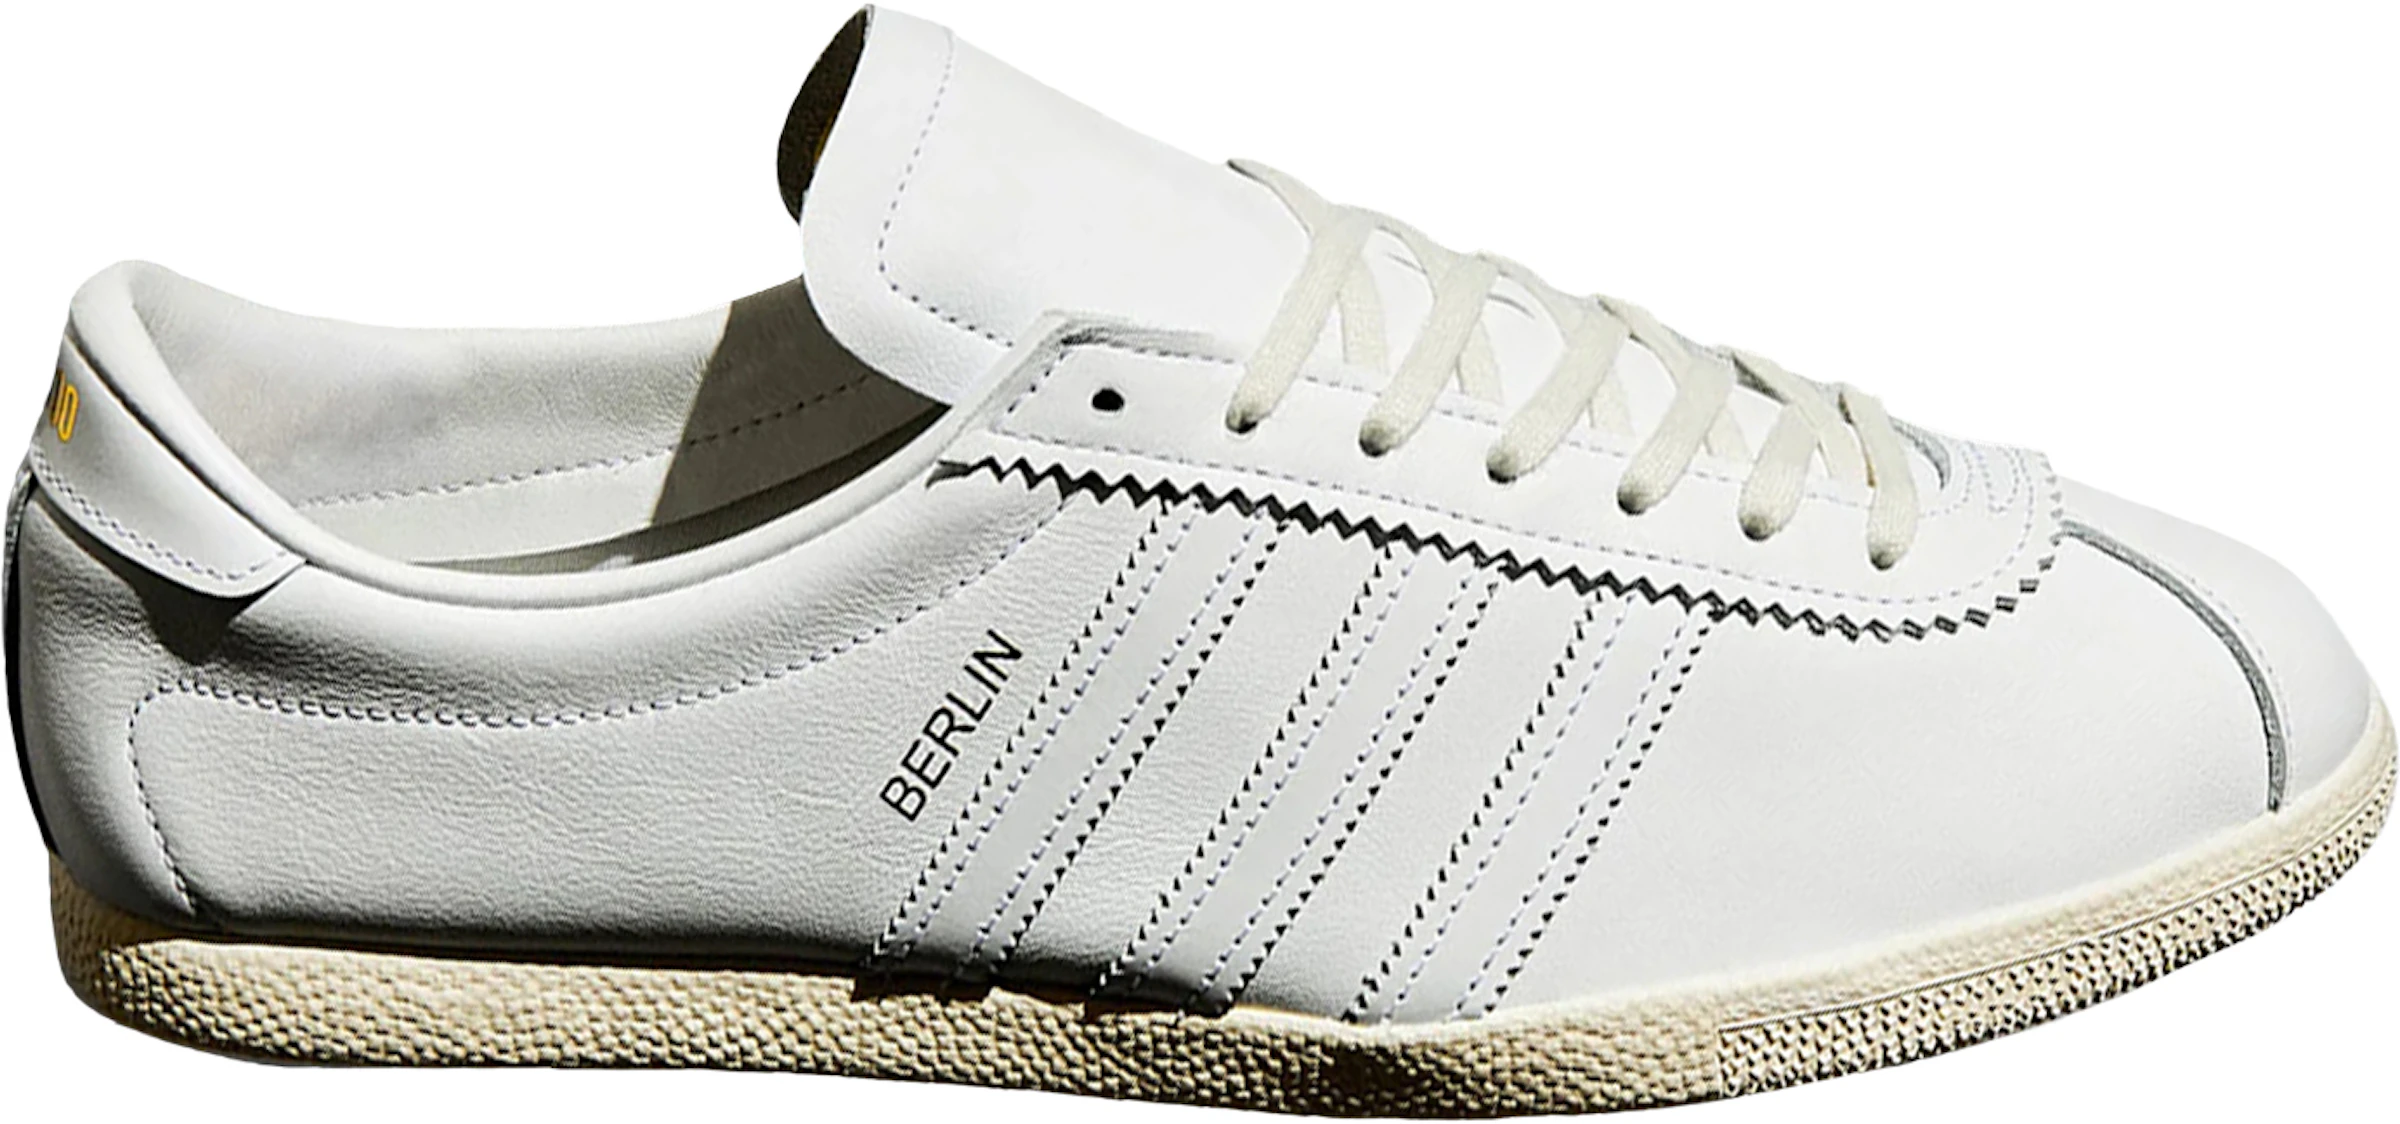 adidas END. City Series in Germany - HP9418 - US